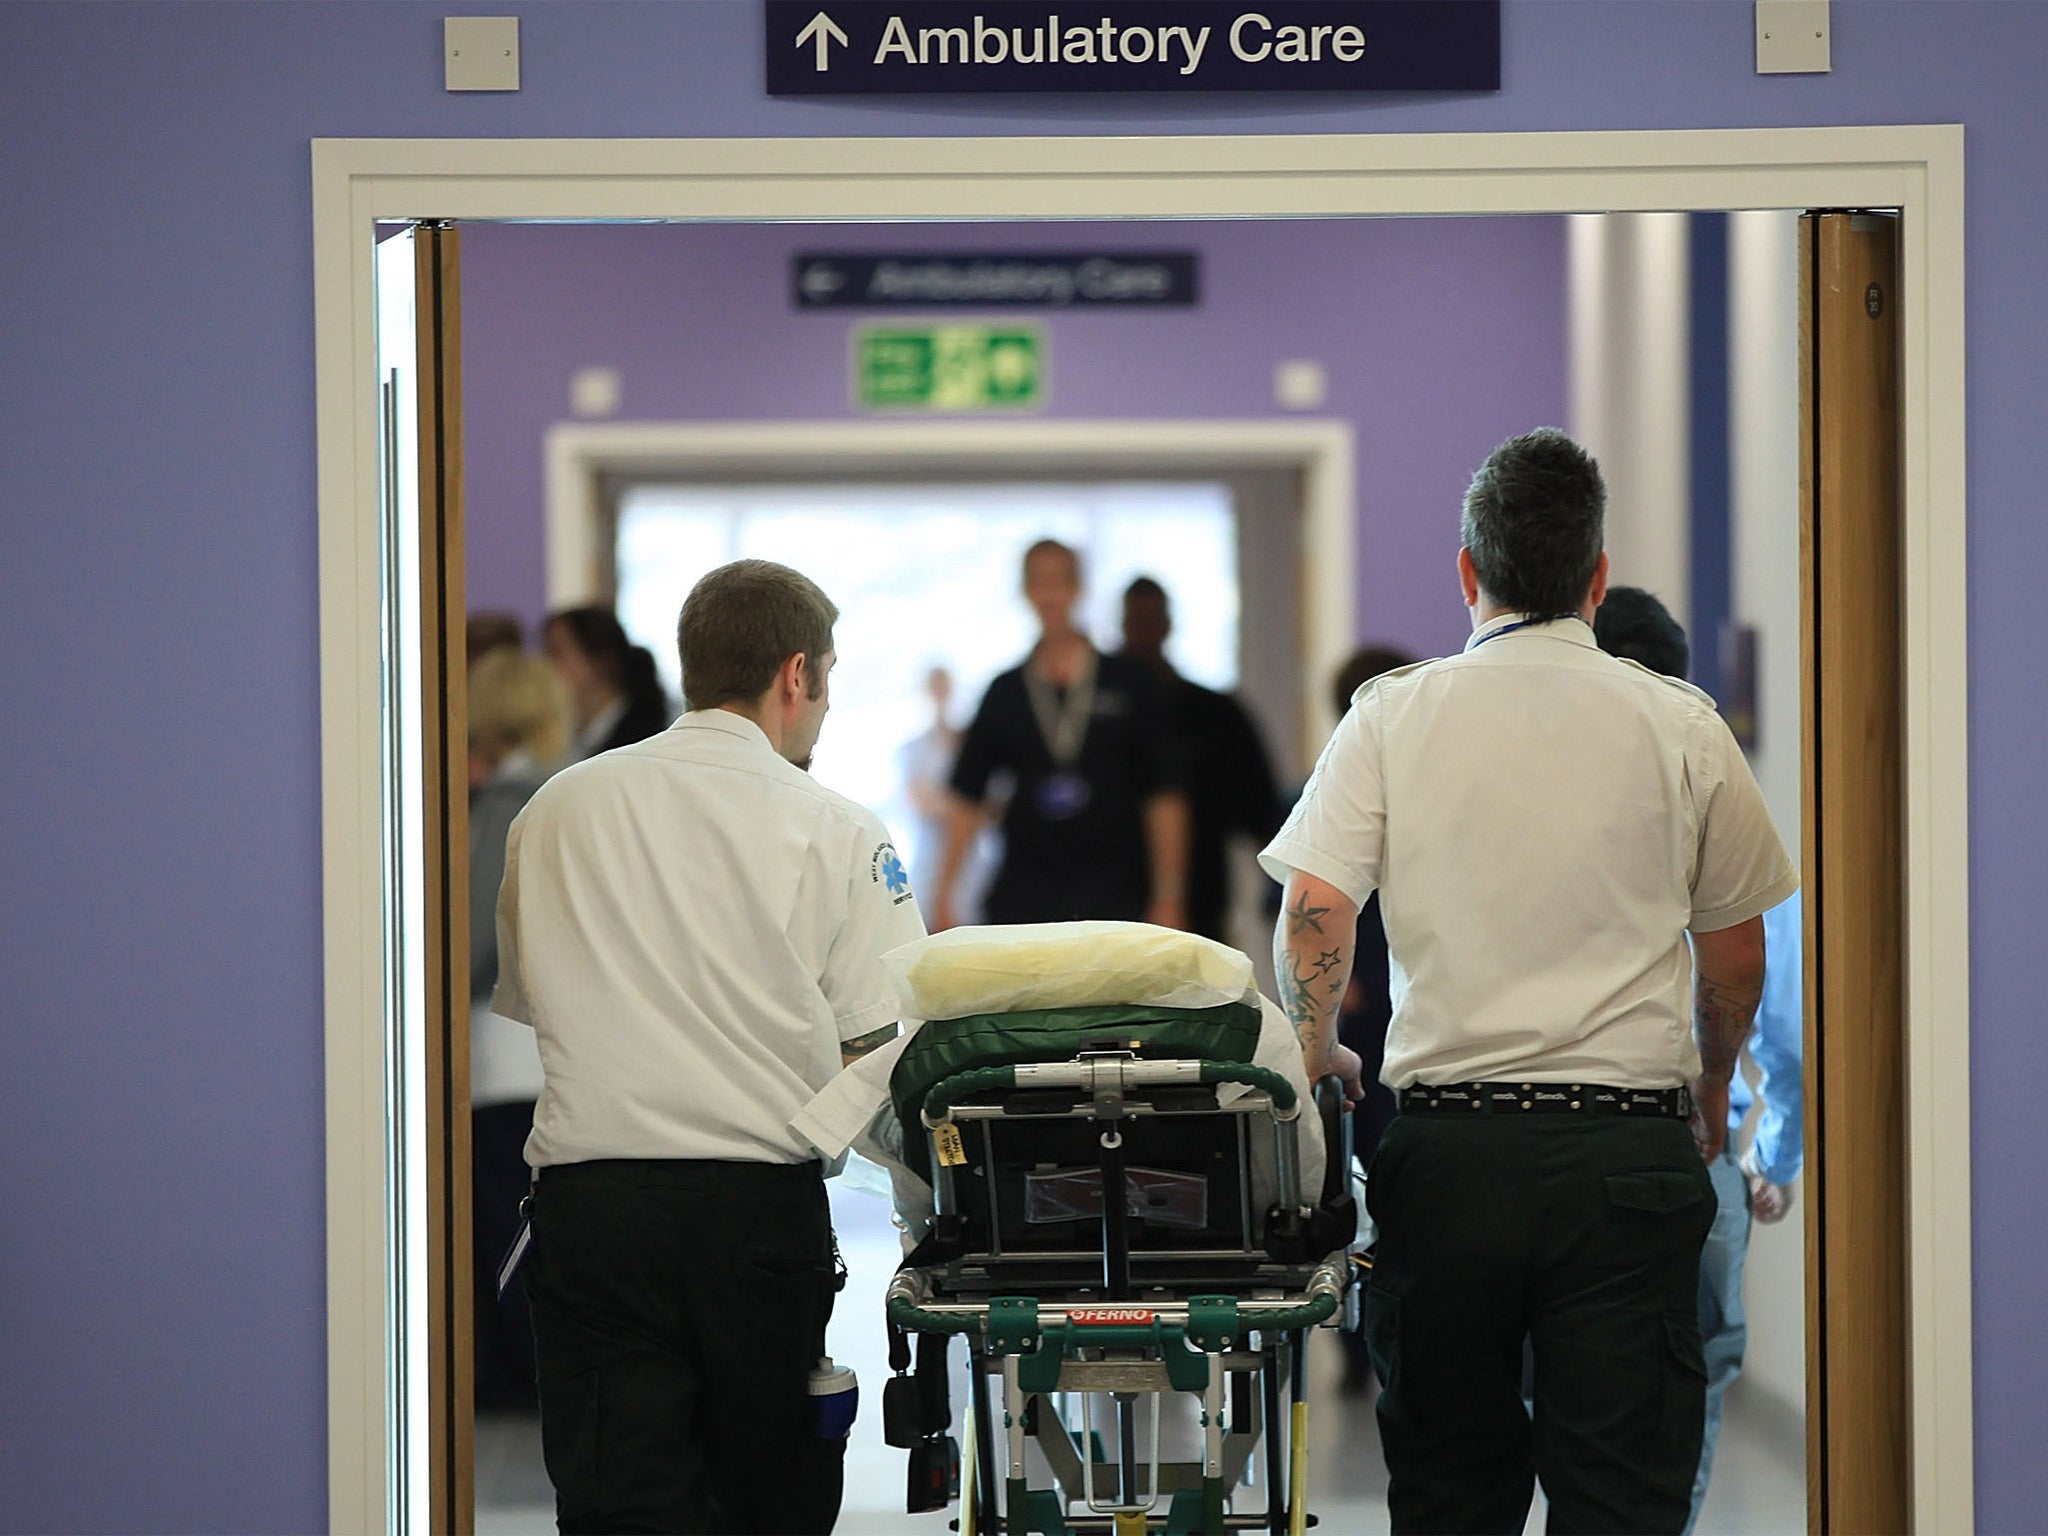 Stroke patients admitted to centralised units could benefit from care by specialised teams